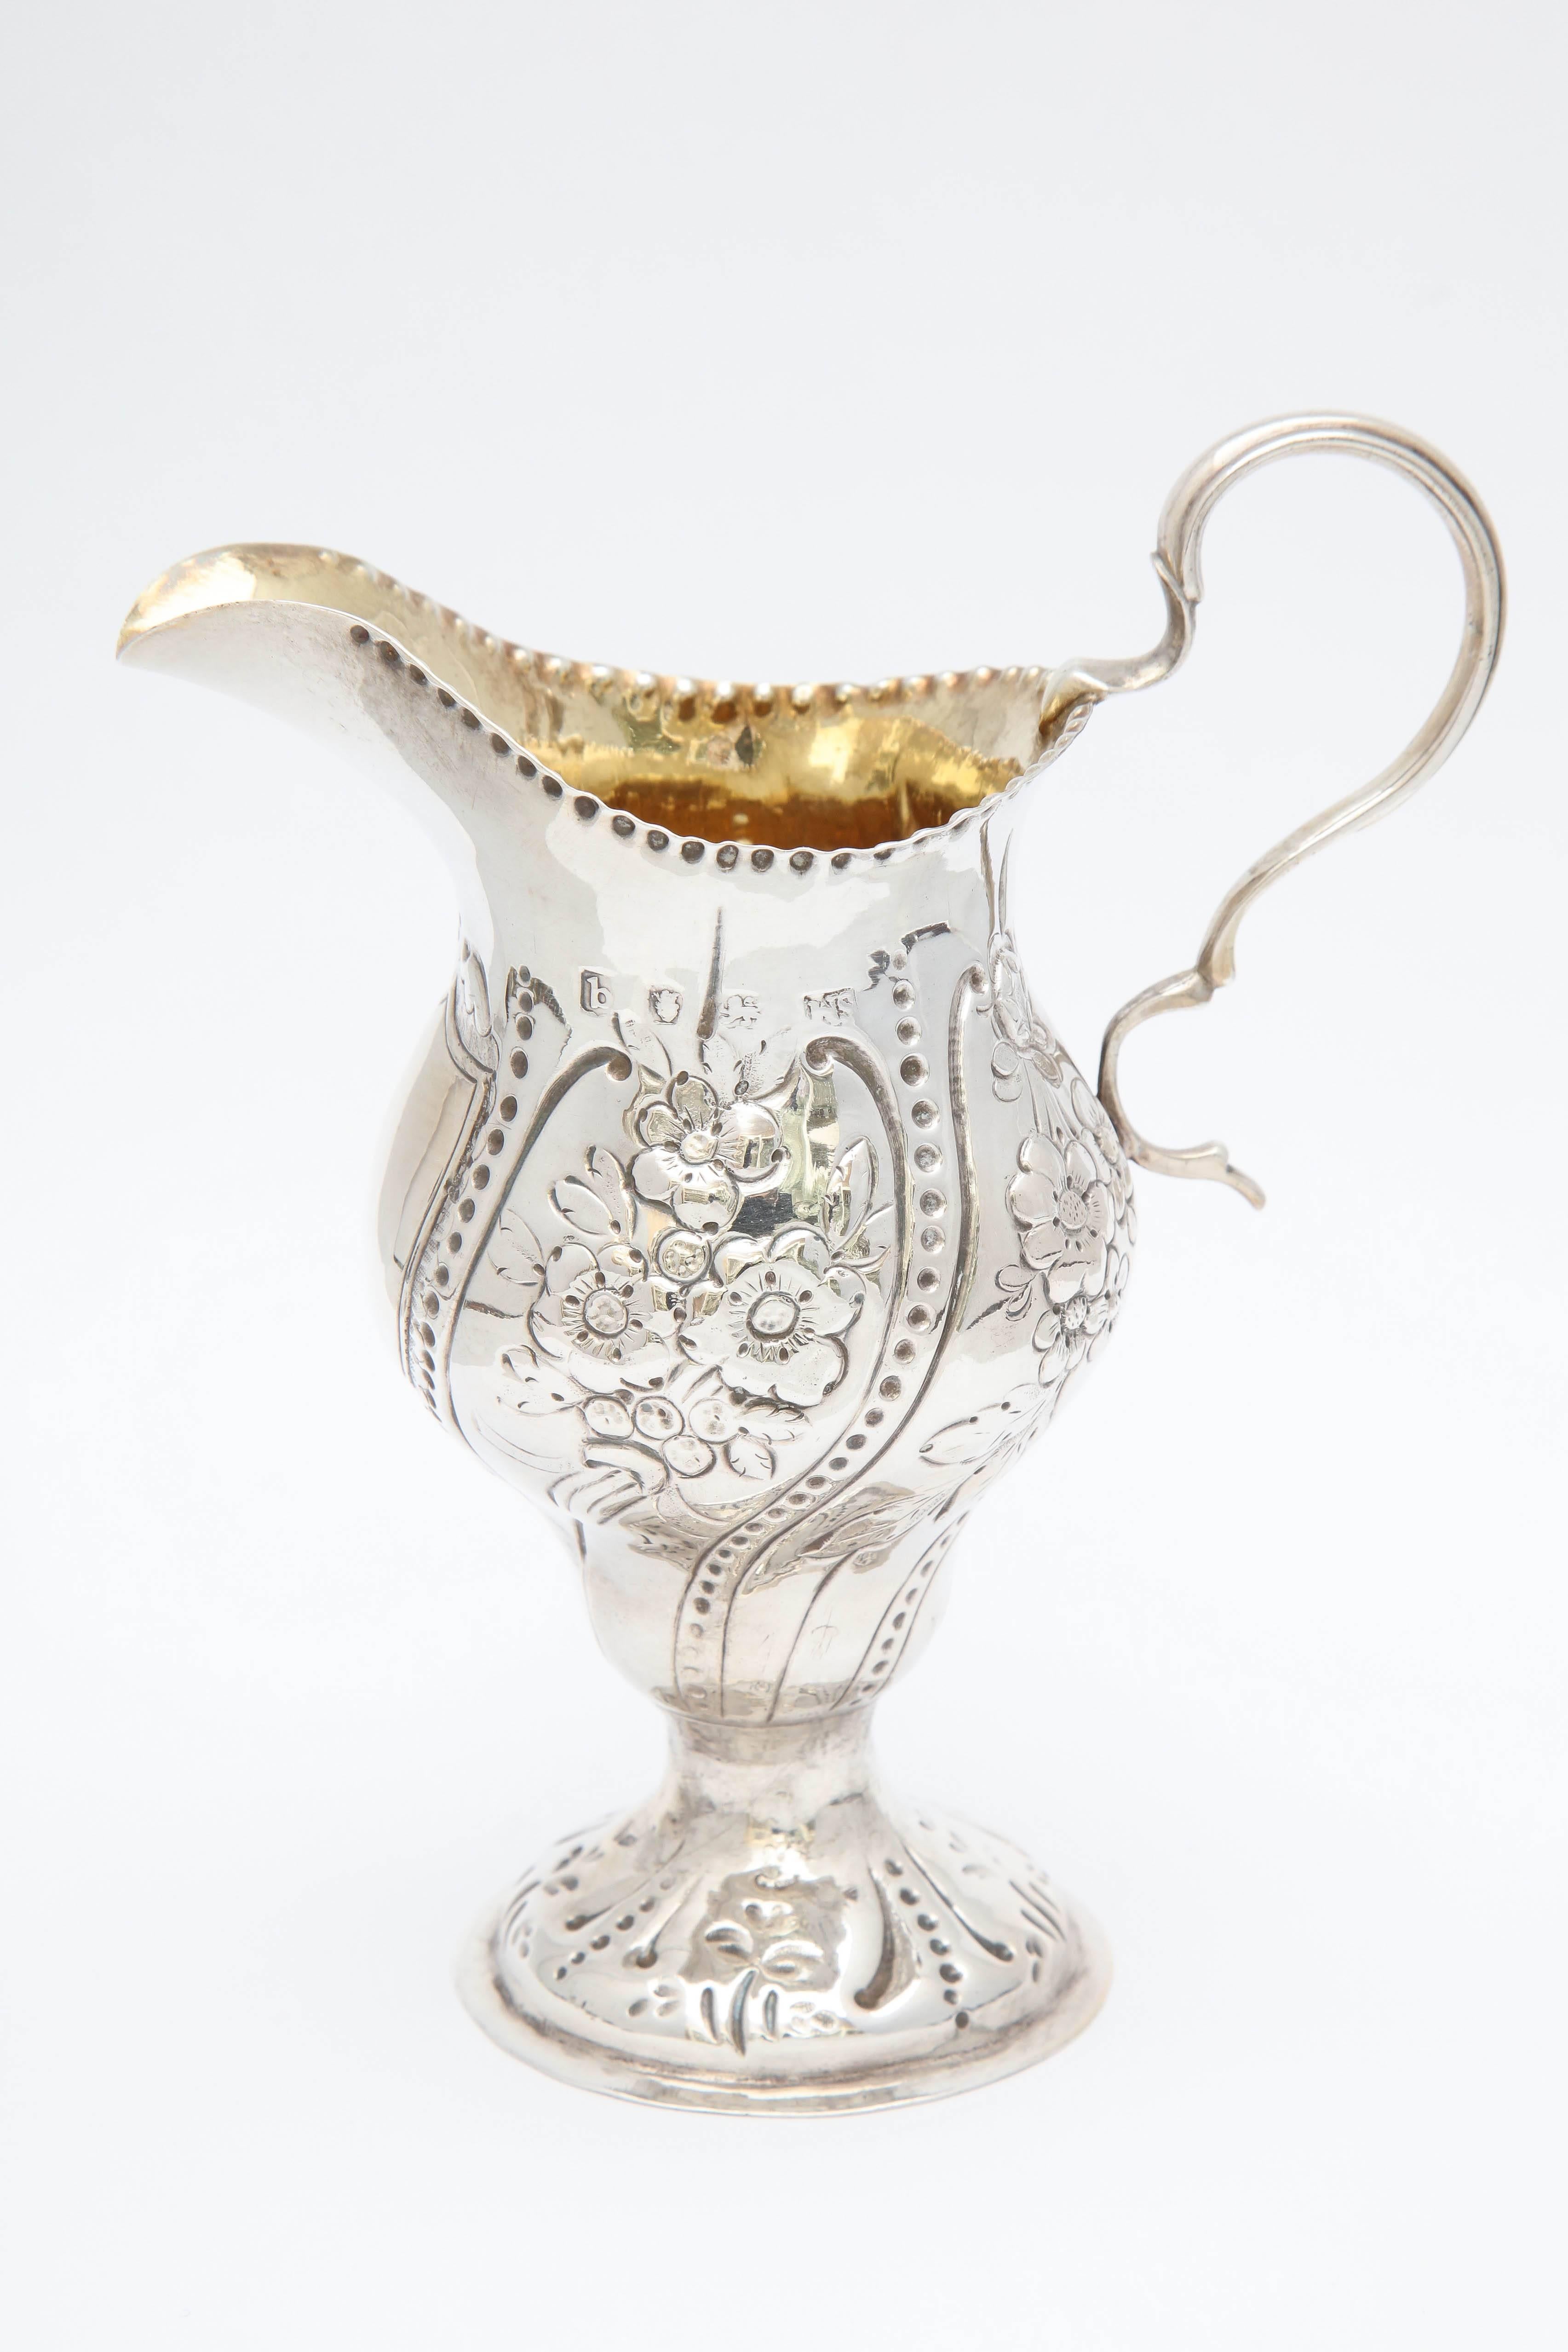 George III, sterling silver cream jug or pitcher, London, 1777, William Sudell - maker. 5 1/2 inches high at highest point x 2 1/2 inches diameter (at widest point) 2 3/4 inches across from handle to spout; base is 2 1/4 inches in diameter. Weighs